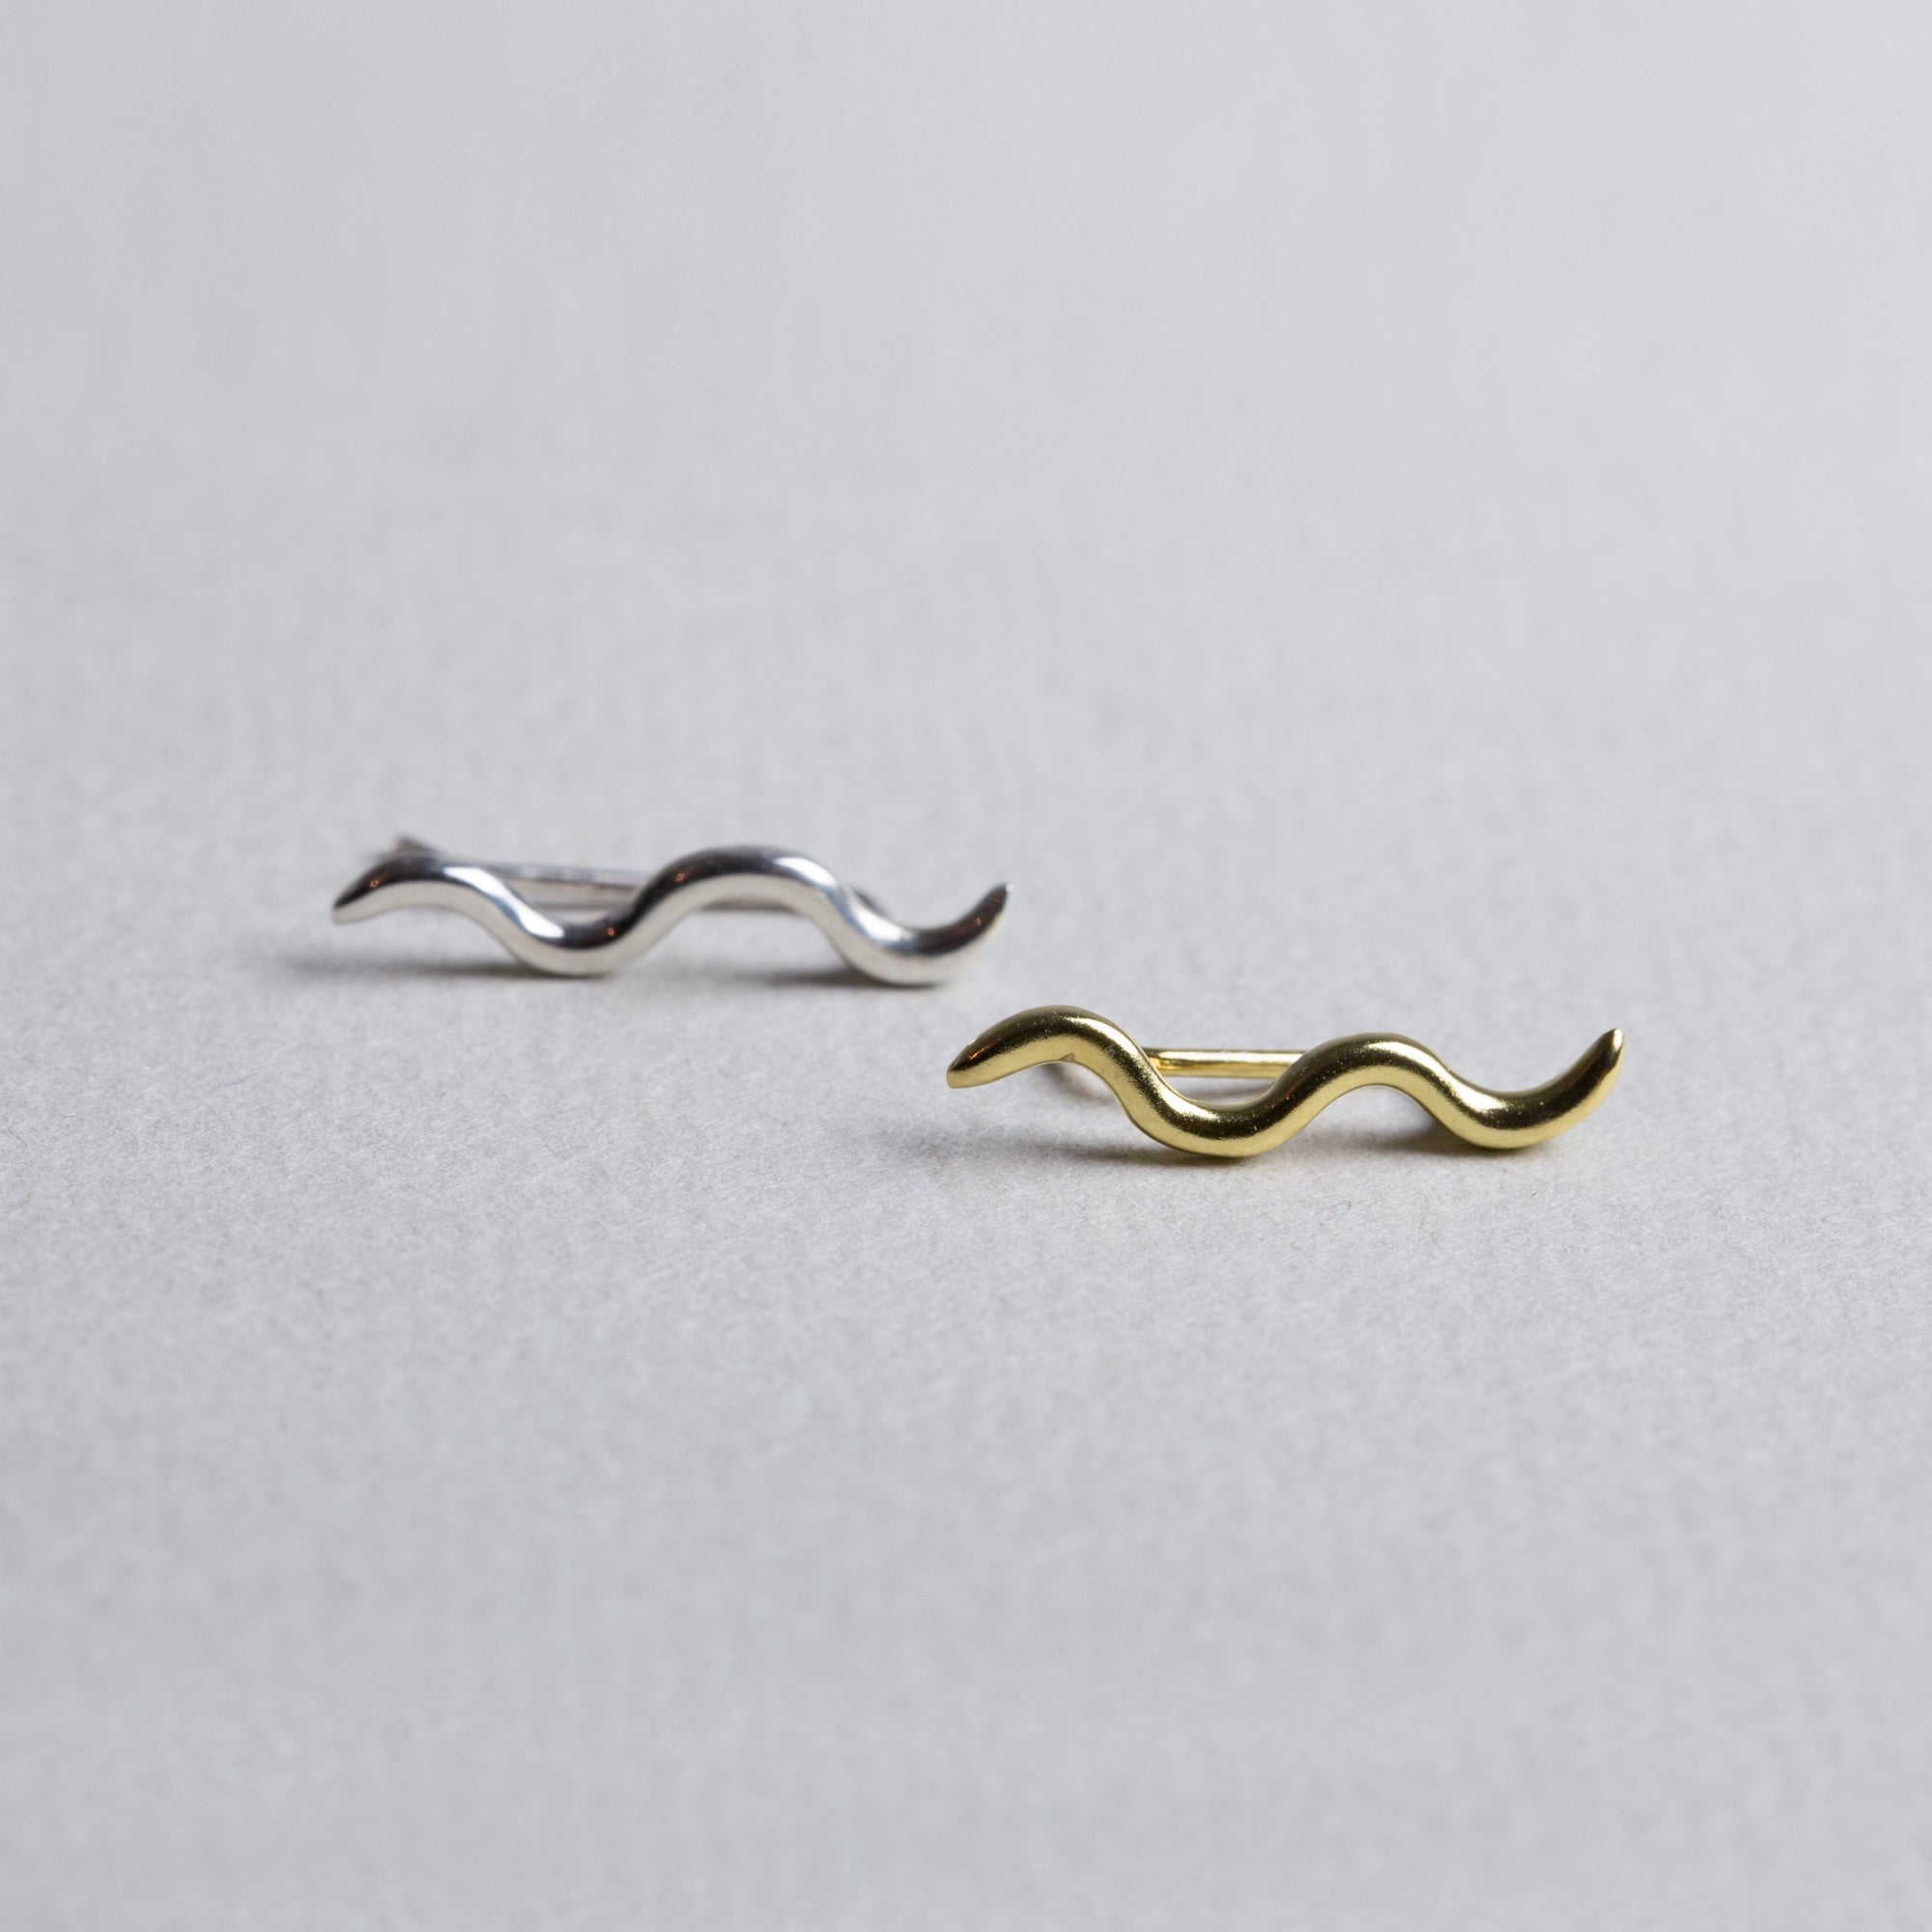 Gold and Silver Climber Earslide